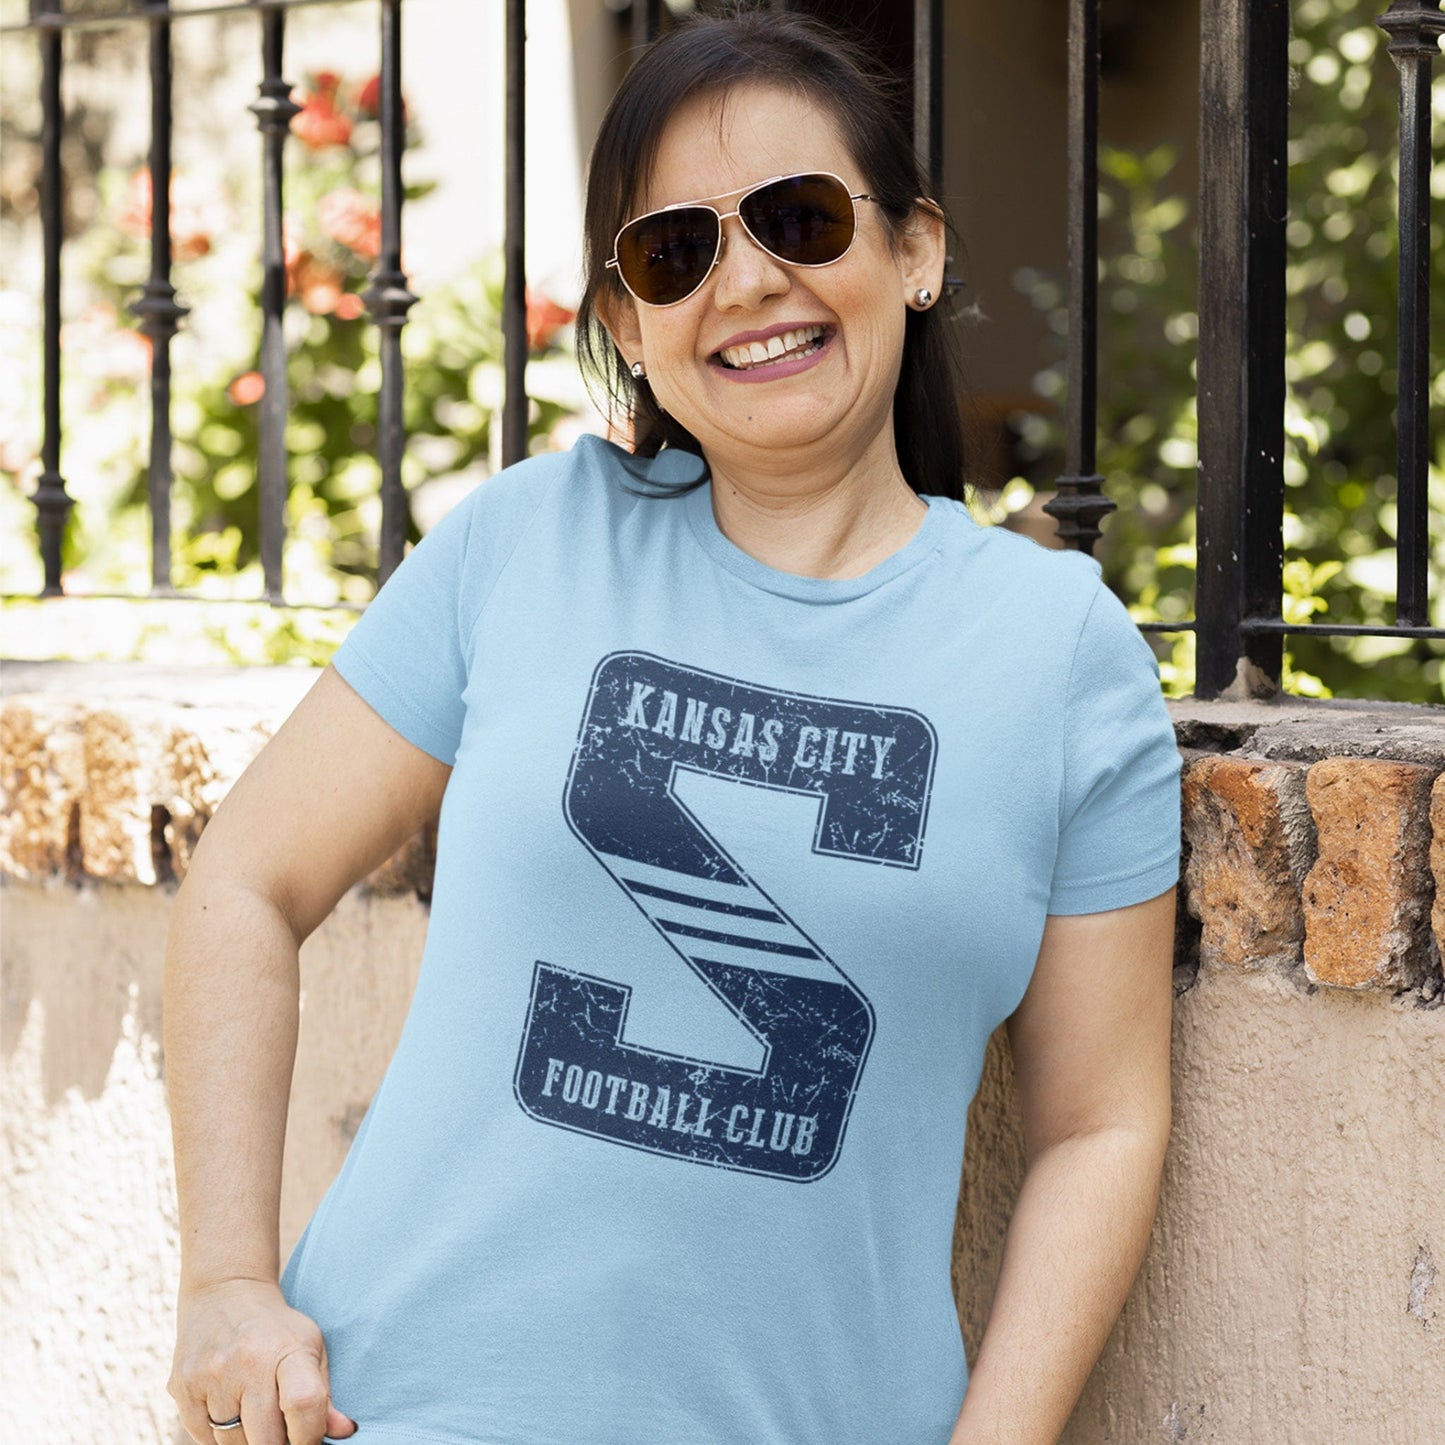 KC Swag Sporting Kansas City navy KANSAS CITY FOOTBALL CLUB on giant striped S on lite blue t-shirt worn by female model leaning on concrete wall wearing sunglasses